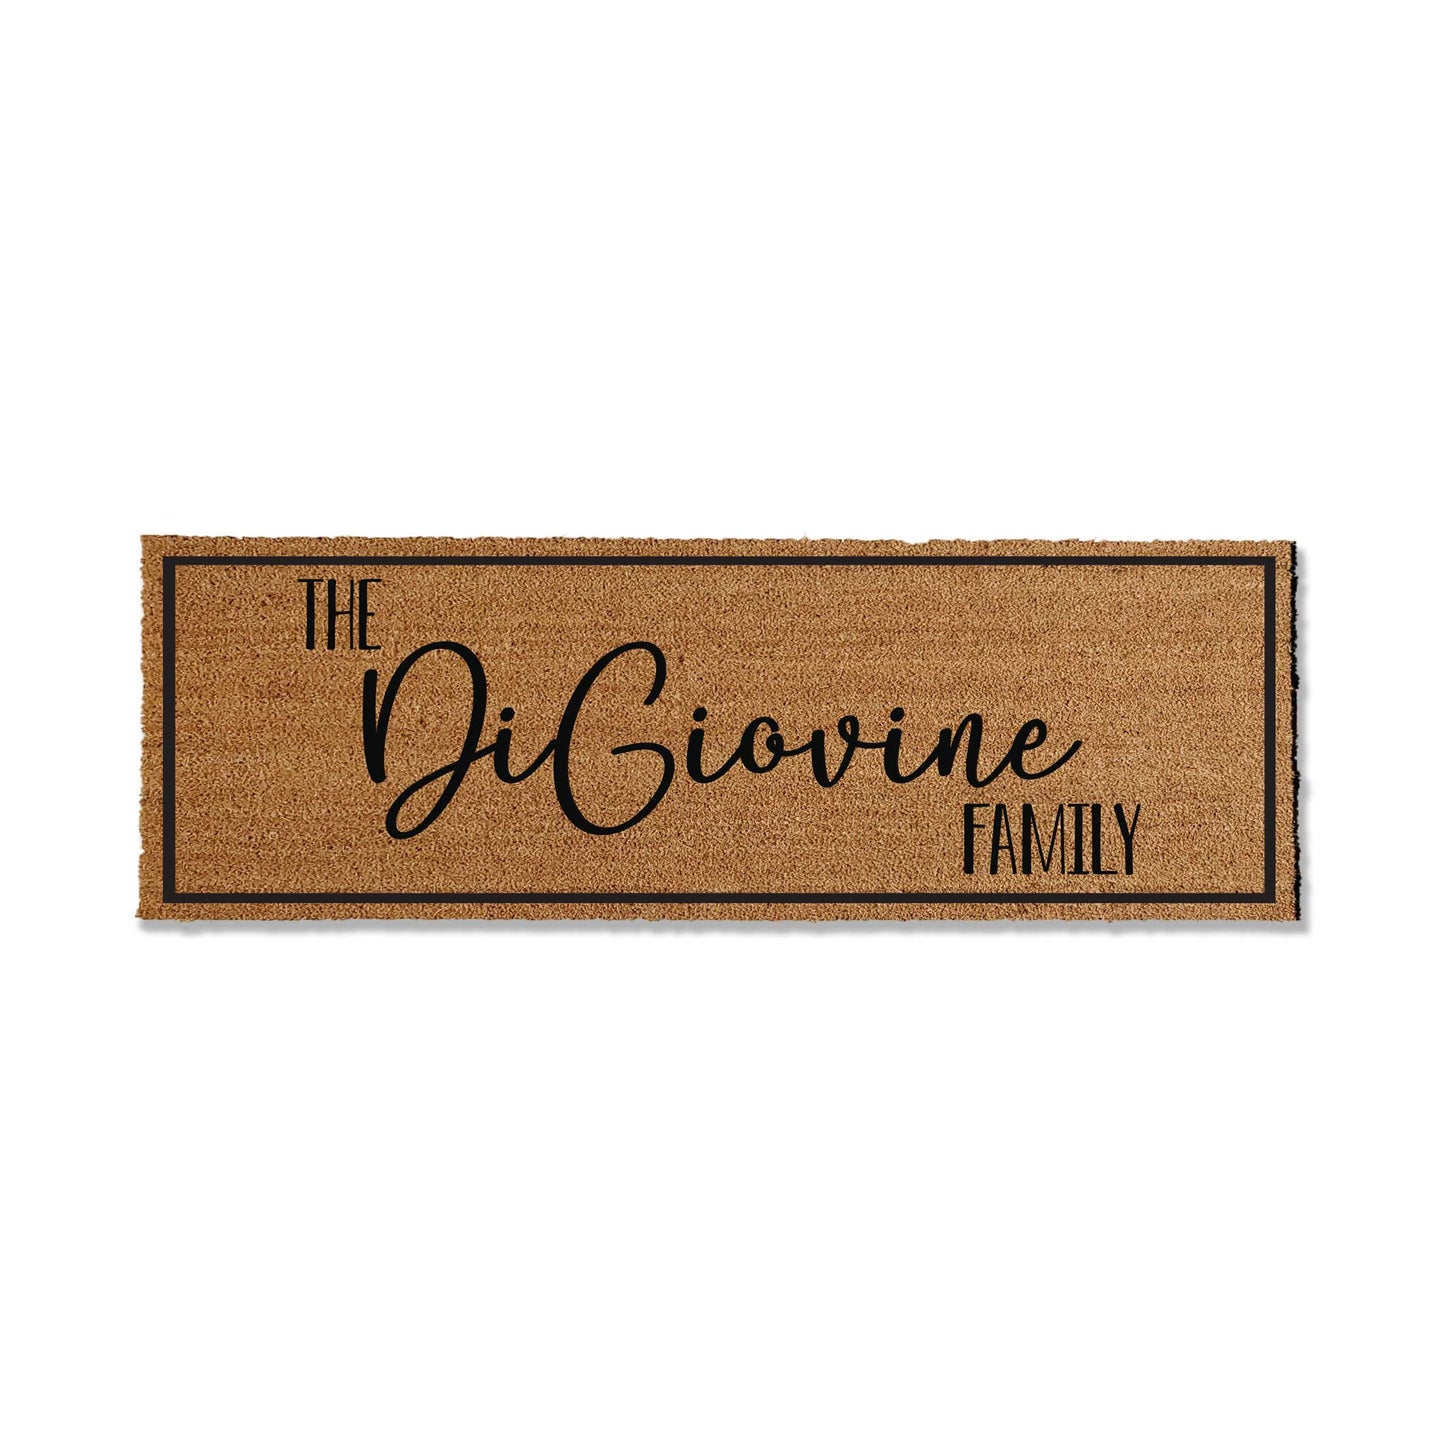 Custom coir doormat measuring 24 inches by 72 inches, featuring a personalized design or message. Made from natural coir fibers for durability and a classic look. Perfect for adding a welcoming touch to your entryway.